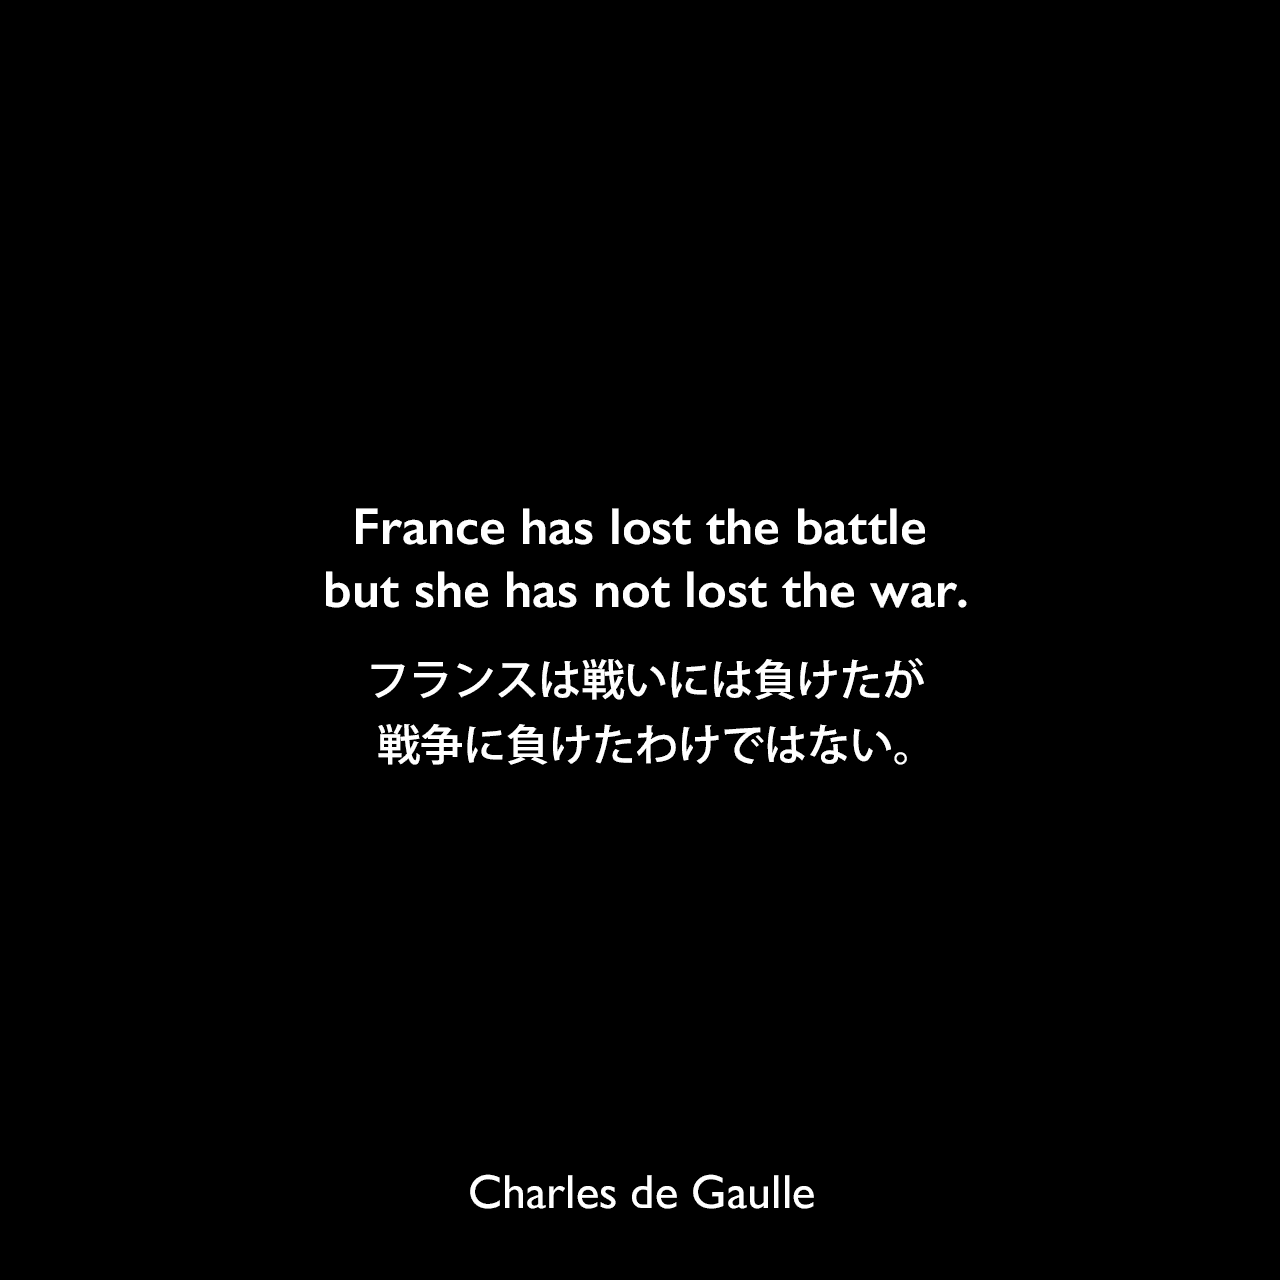 France has lost the battle but she has not lost the war.フランスは戦いには負けたが、戦争に負けたわけではない。Charles de Gaulle